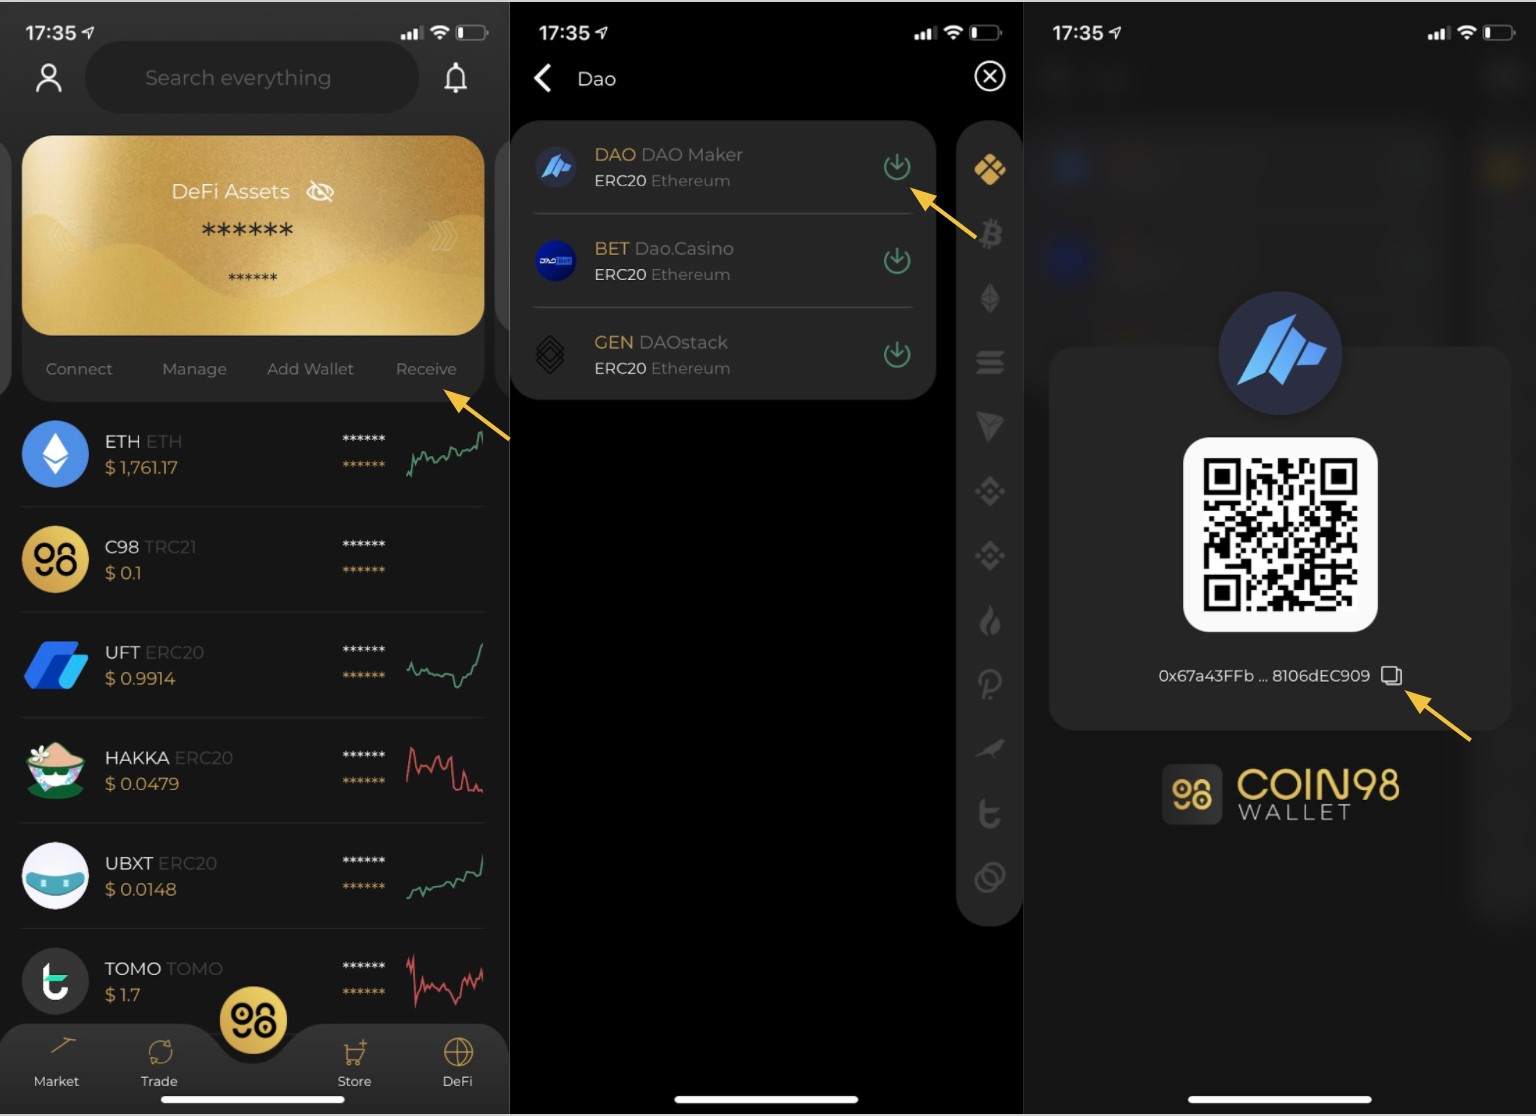 How to get coin tokens on coin98 wallet